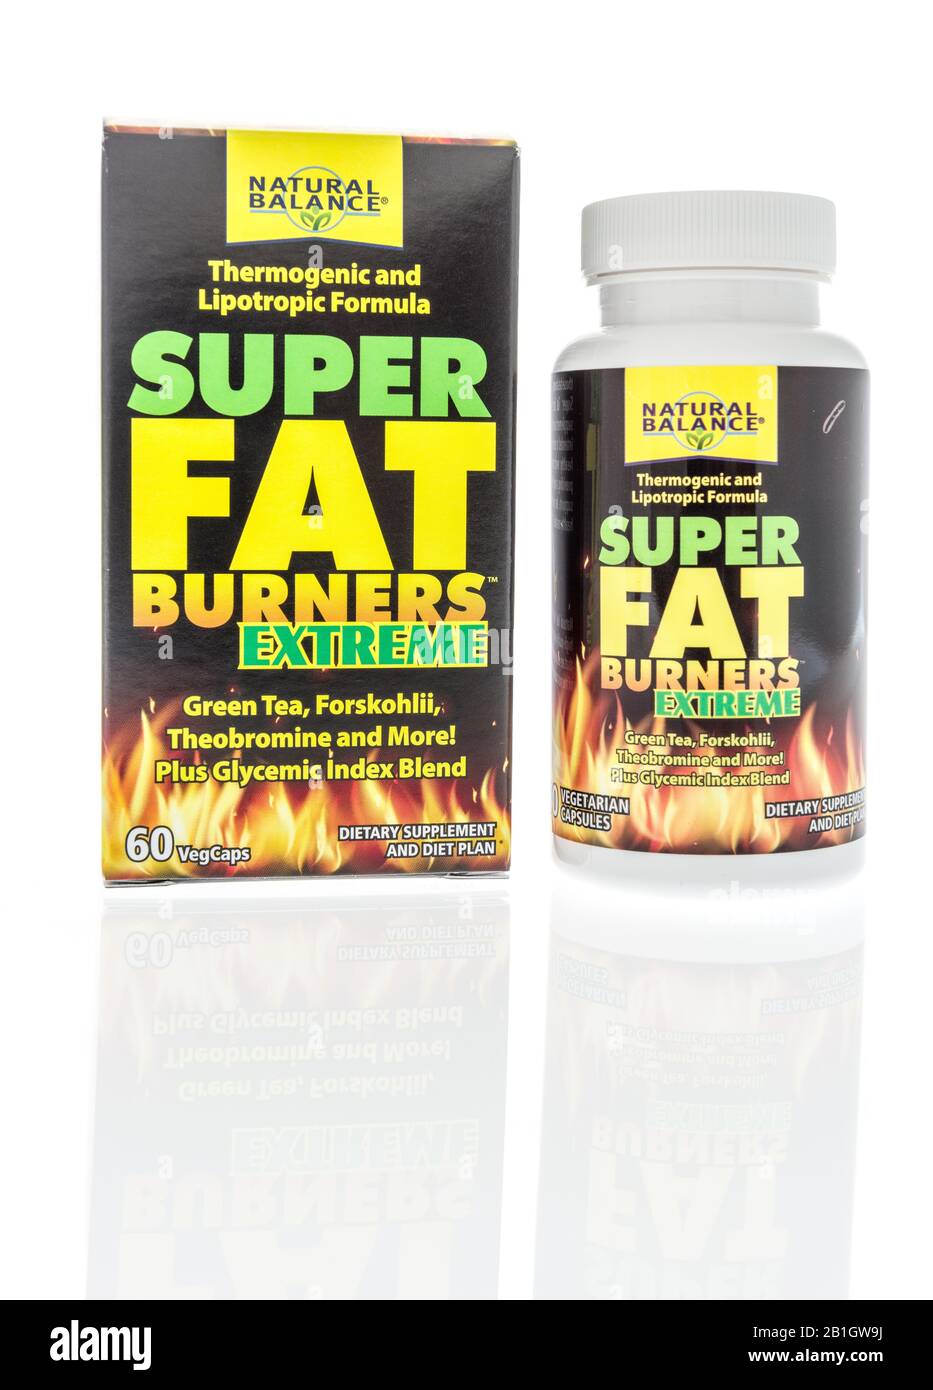 Winneconne,  WI - 11 February 2020:  A bottle of Natural balance super fat burners extreme supplement on an isolated background. Stock Photo